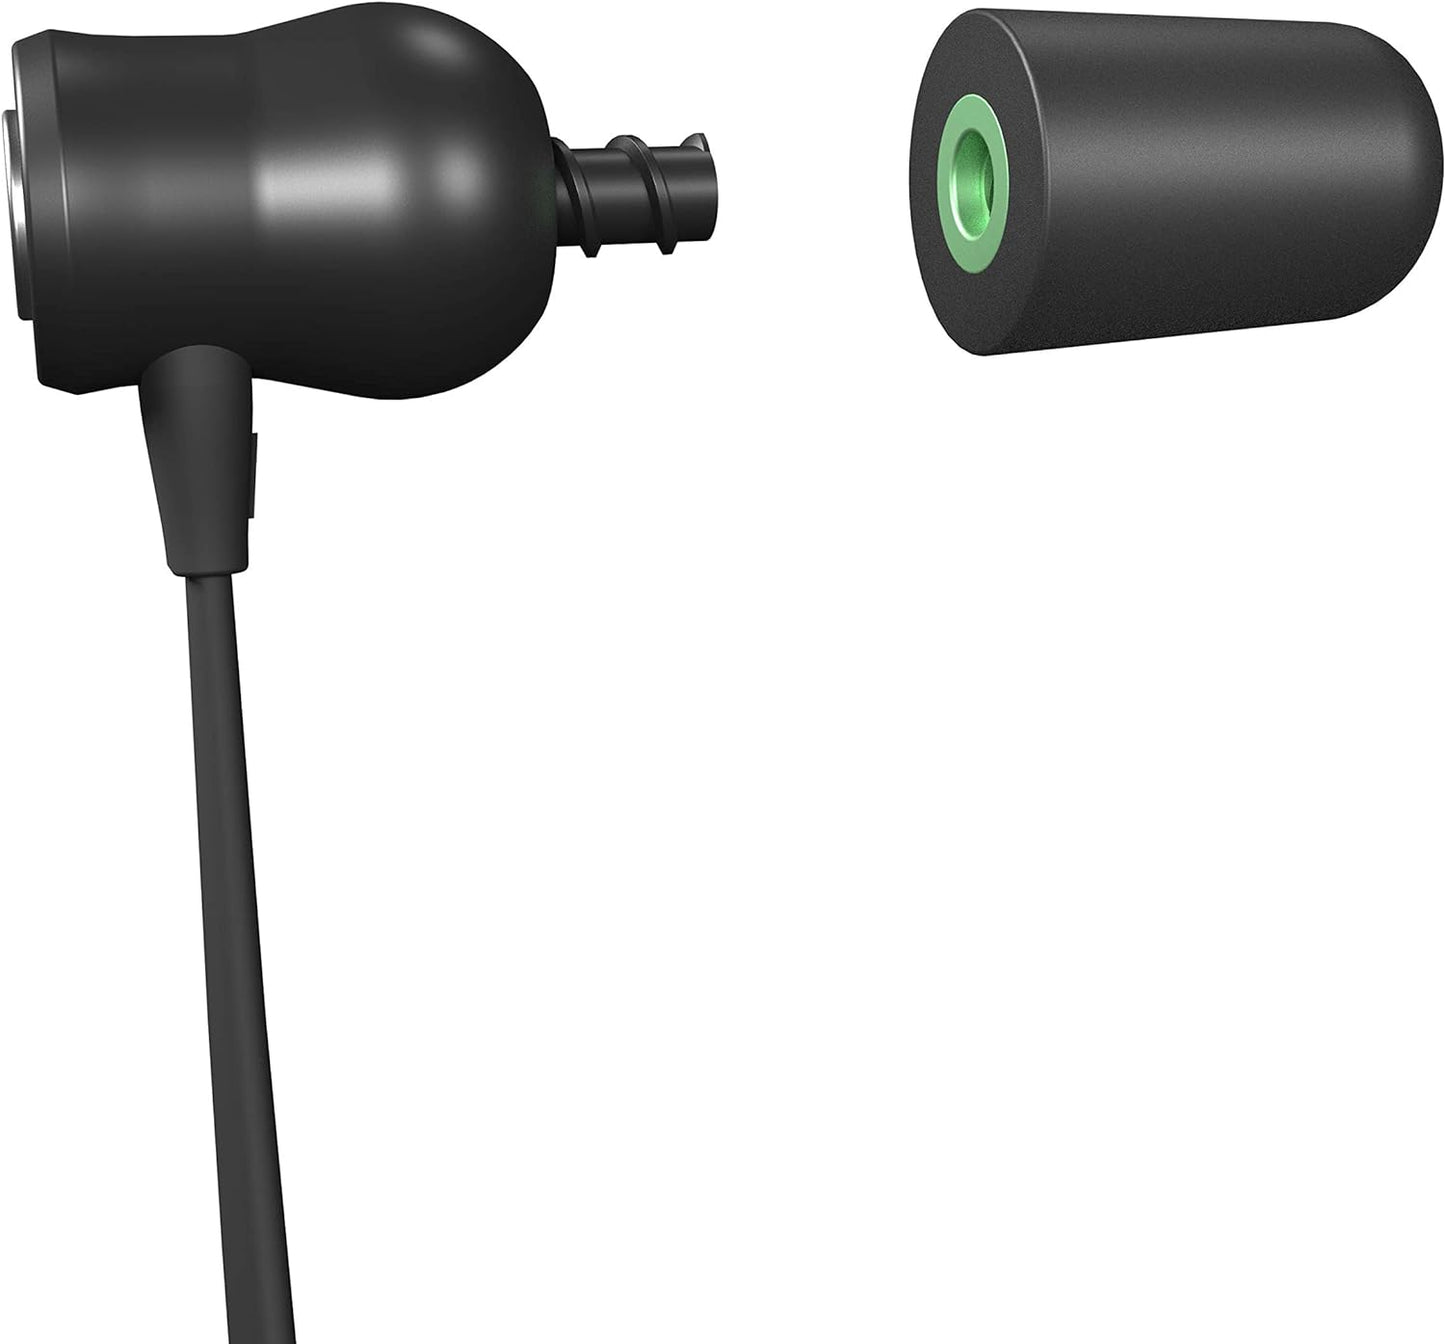 Xtra 2.0 Earplug Earbuds: OSHA Compliant Bluetooth Hearing Protection, 27 Db NRR Sound Isolation, 85 Db Volume Limit, up to 11 Hour Battery Life, Noise Cancelling Mic